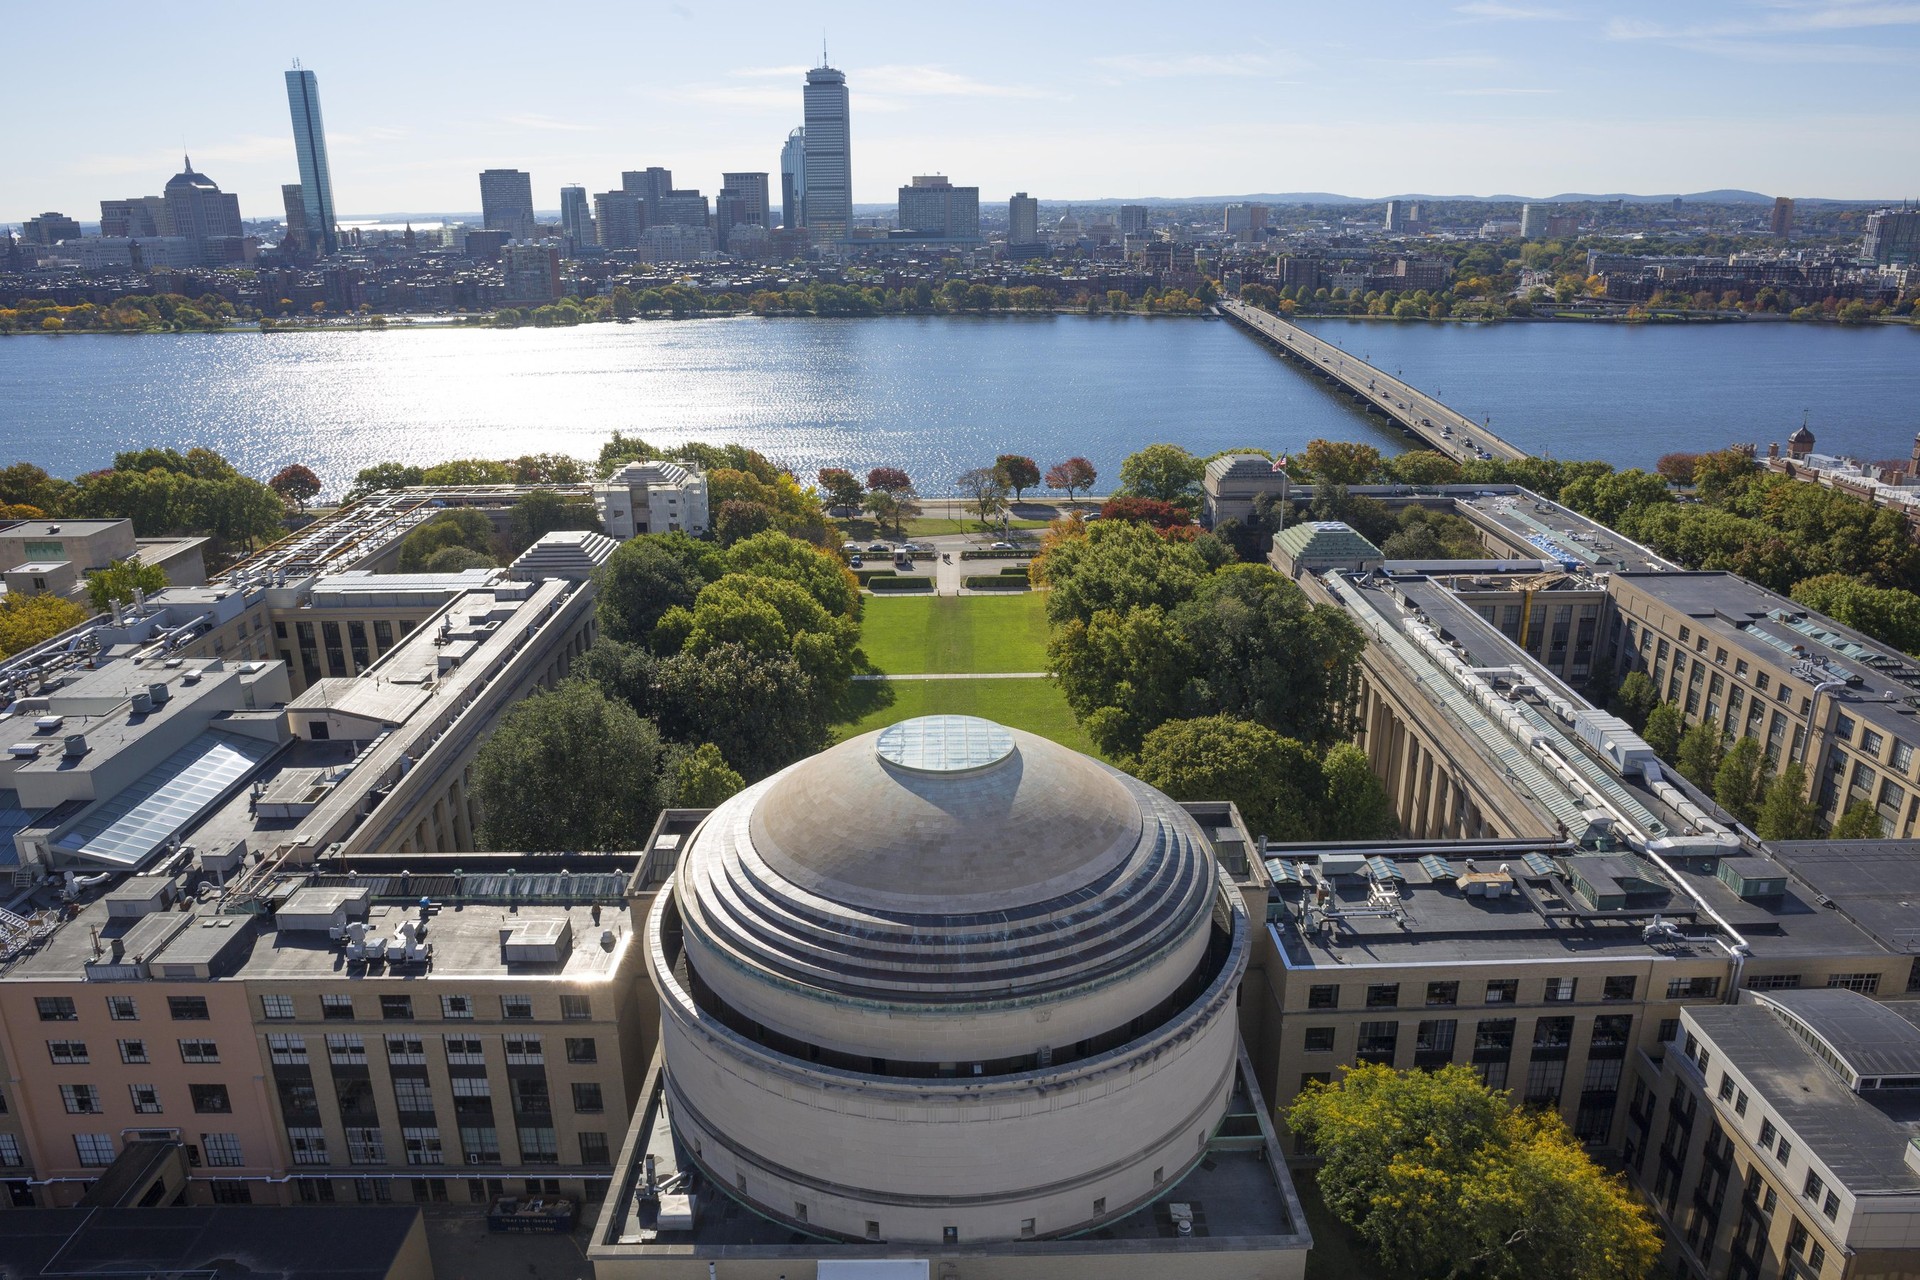 Bird's eye view of MIT University's Great Dome with the Charles River and Harvard Bridge in the background